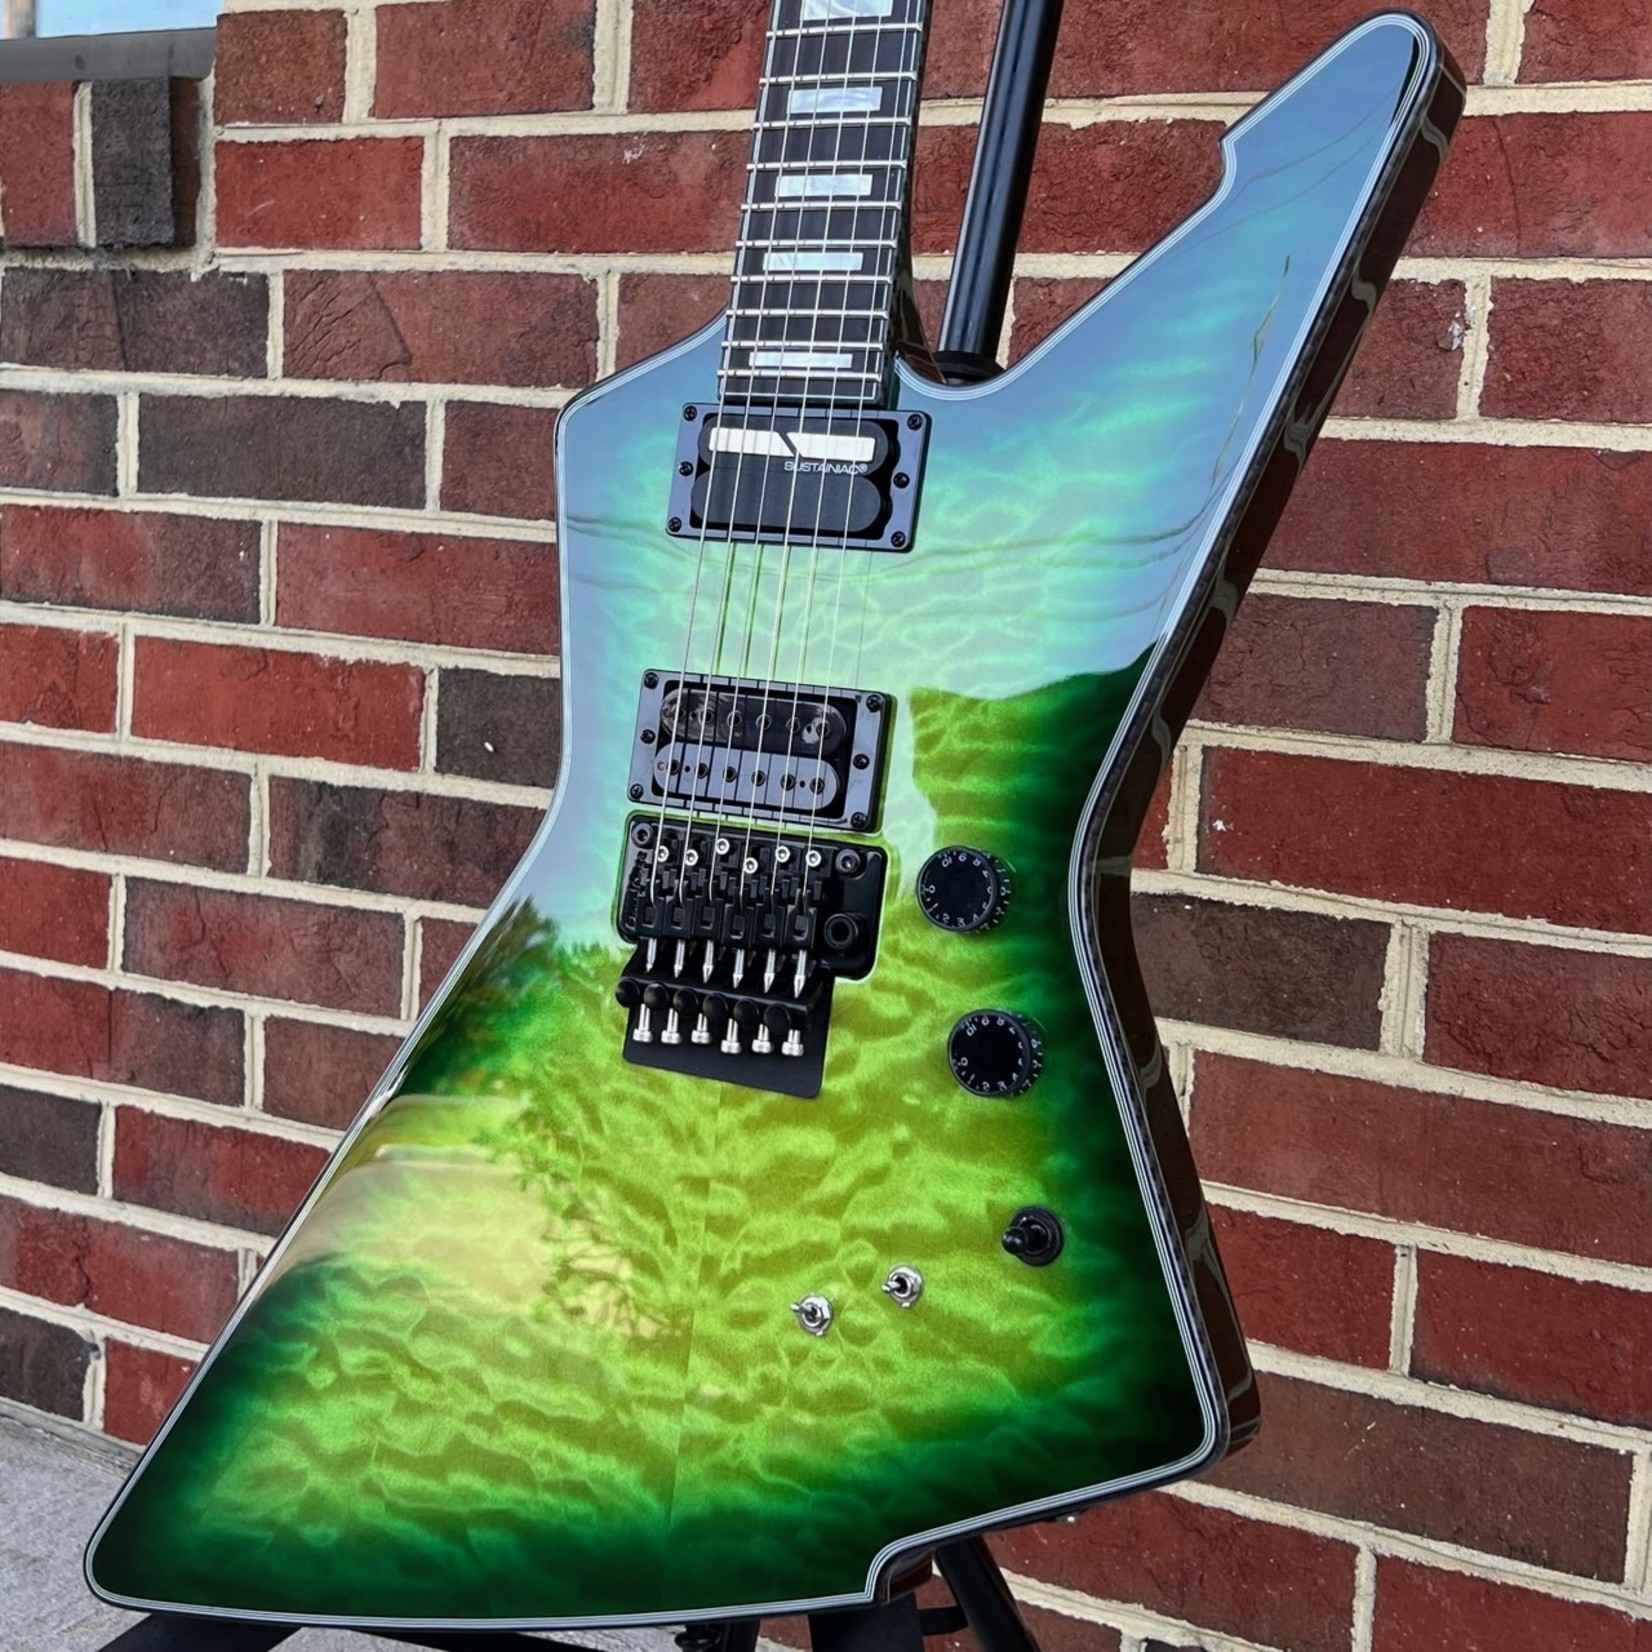 Schecter Guitar Research Schecter E-1 FR S Special Edition, Green Burst, Quilted Maple Top, Sustainiac Pickup, SN# W22042489